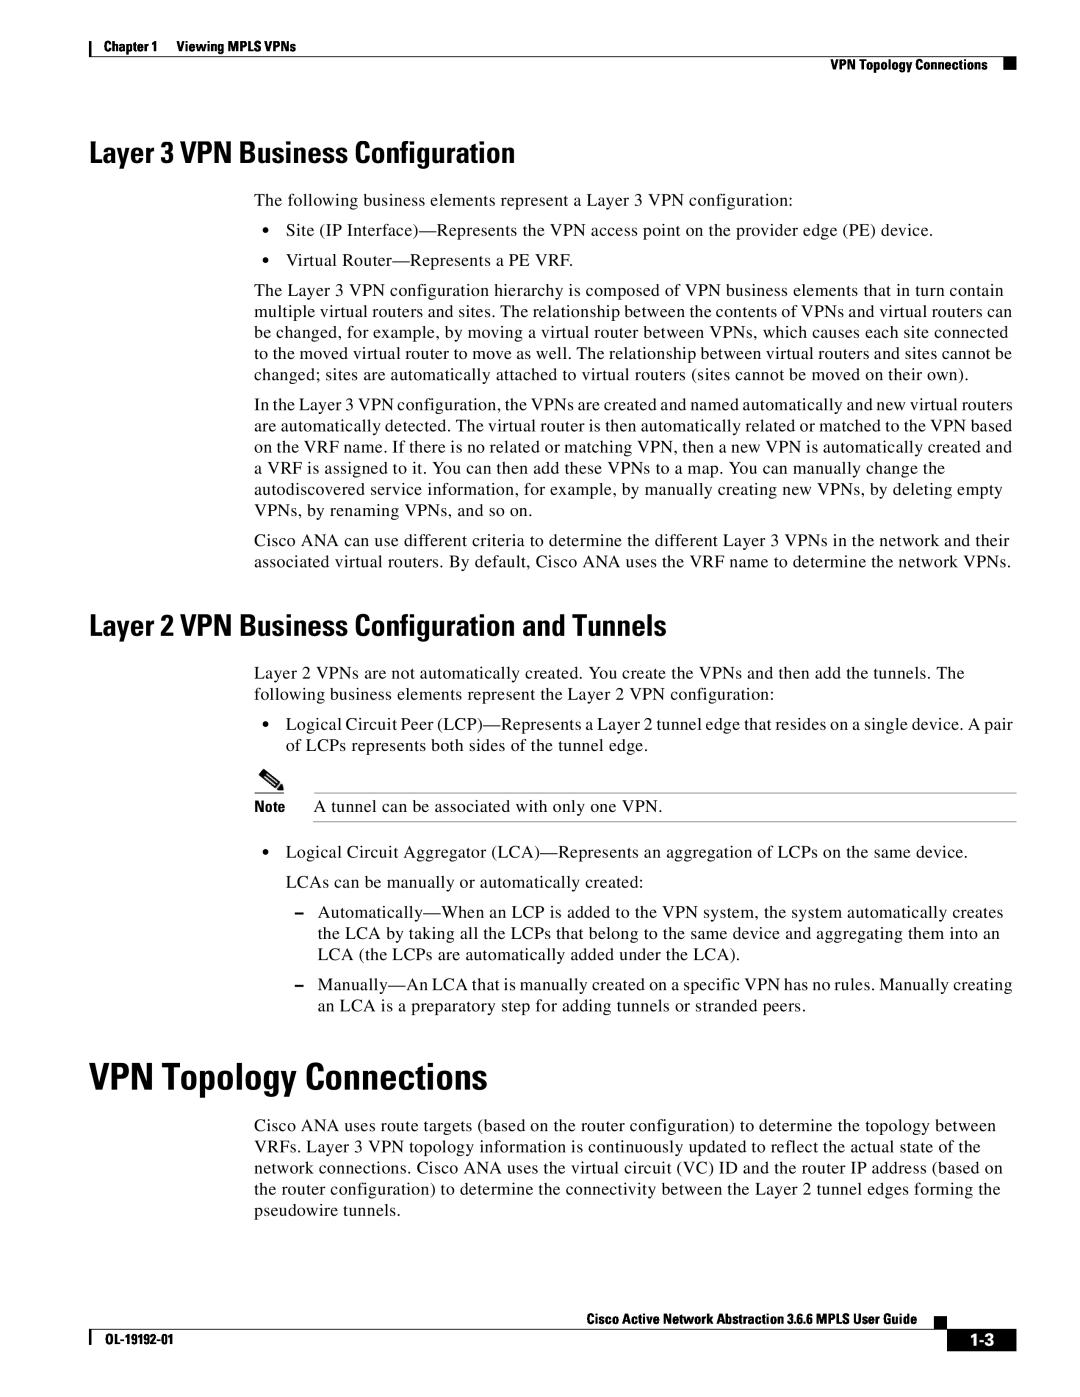 Cisco Systems 3.6.6 manual VPN Topology Connections, Layer 3 VPN Business Configuration 